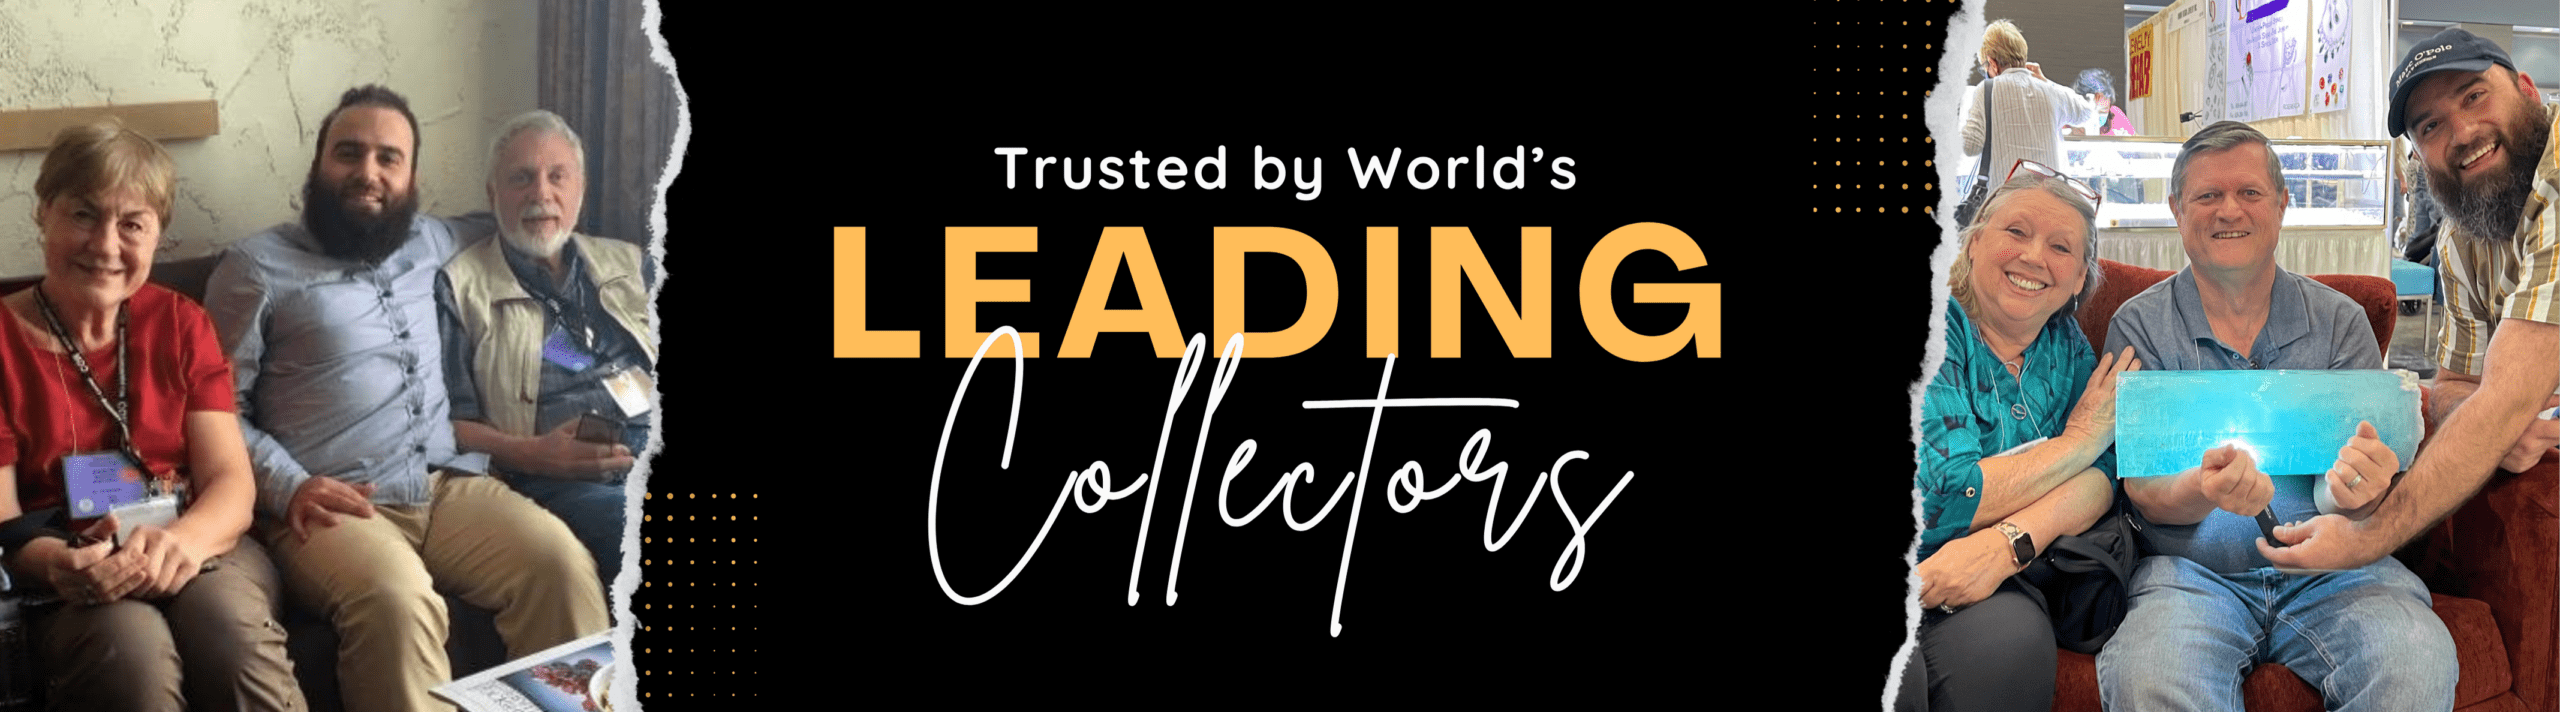 Leading Collectors Banner